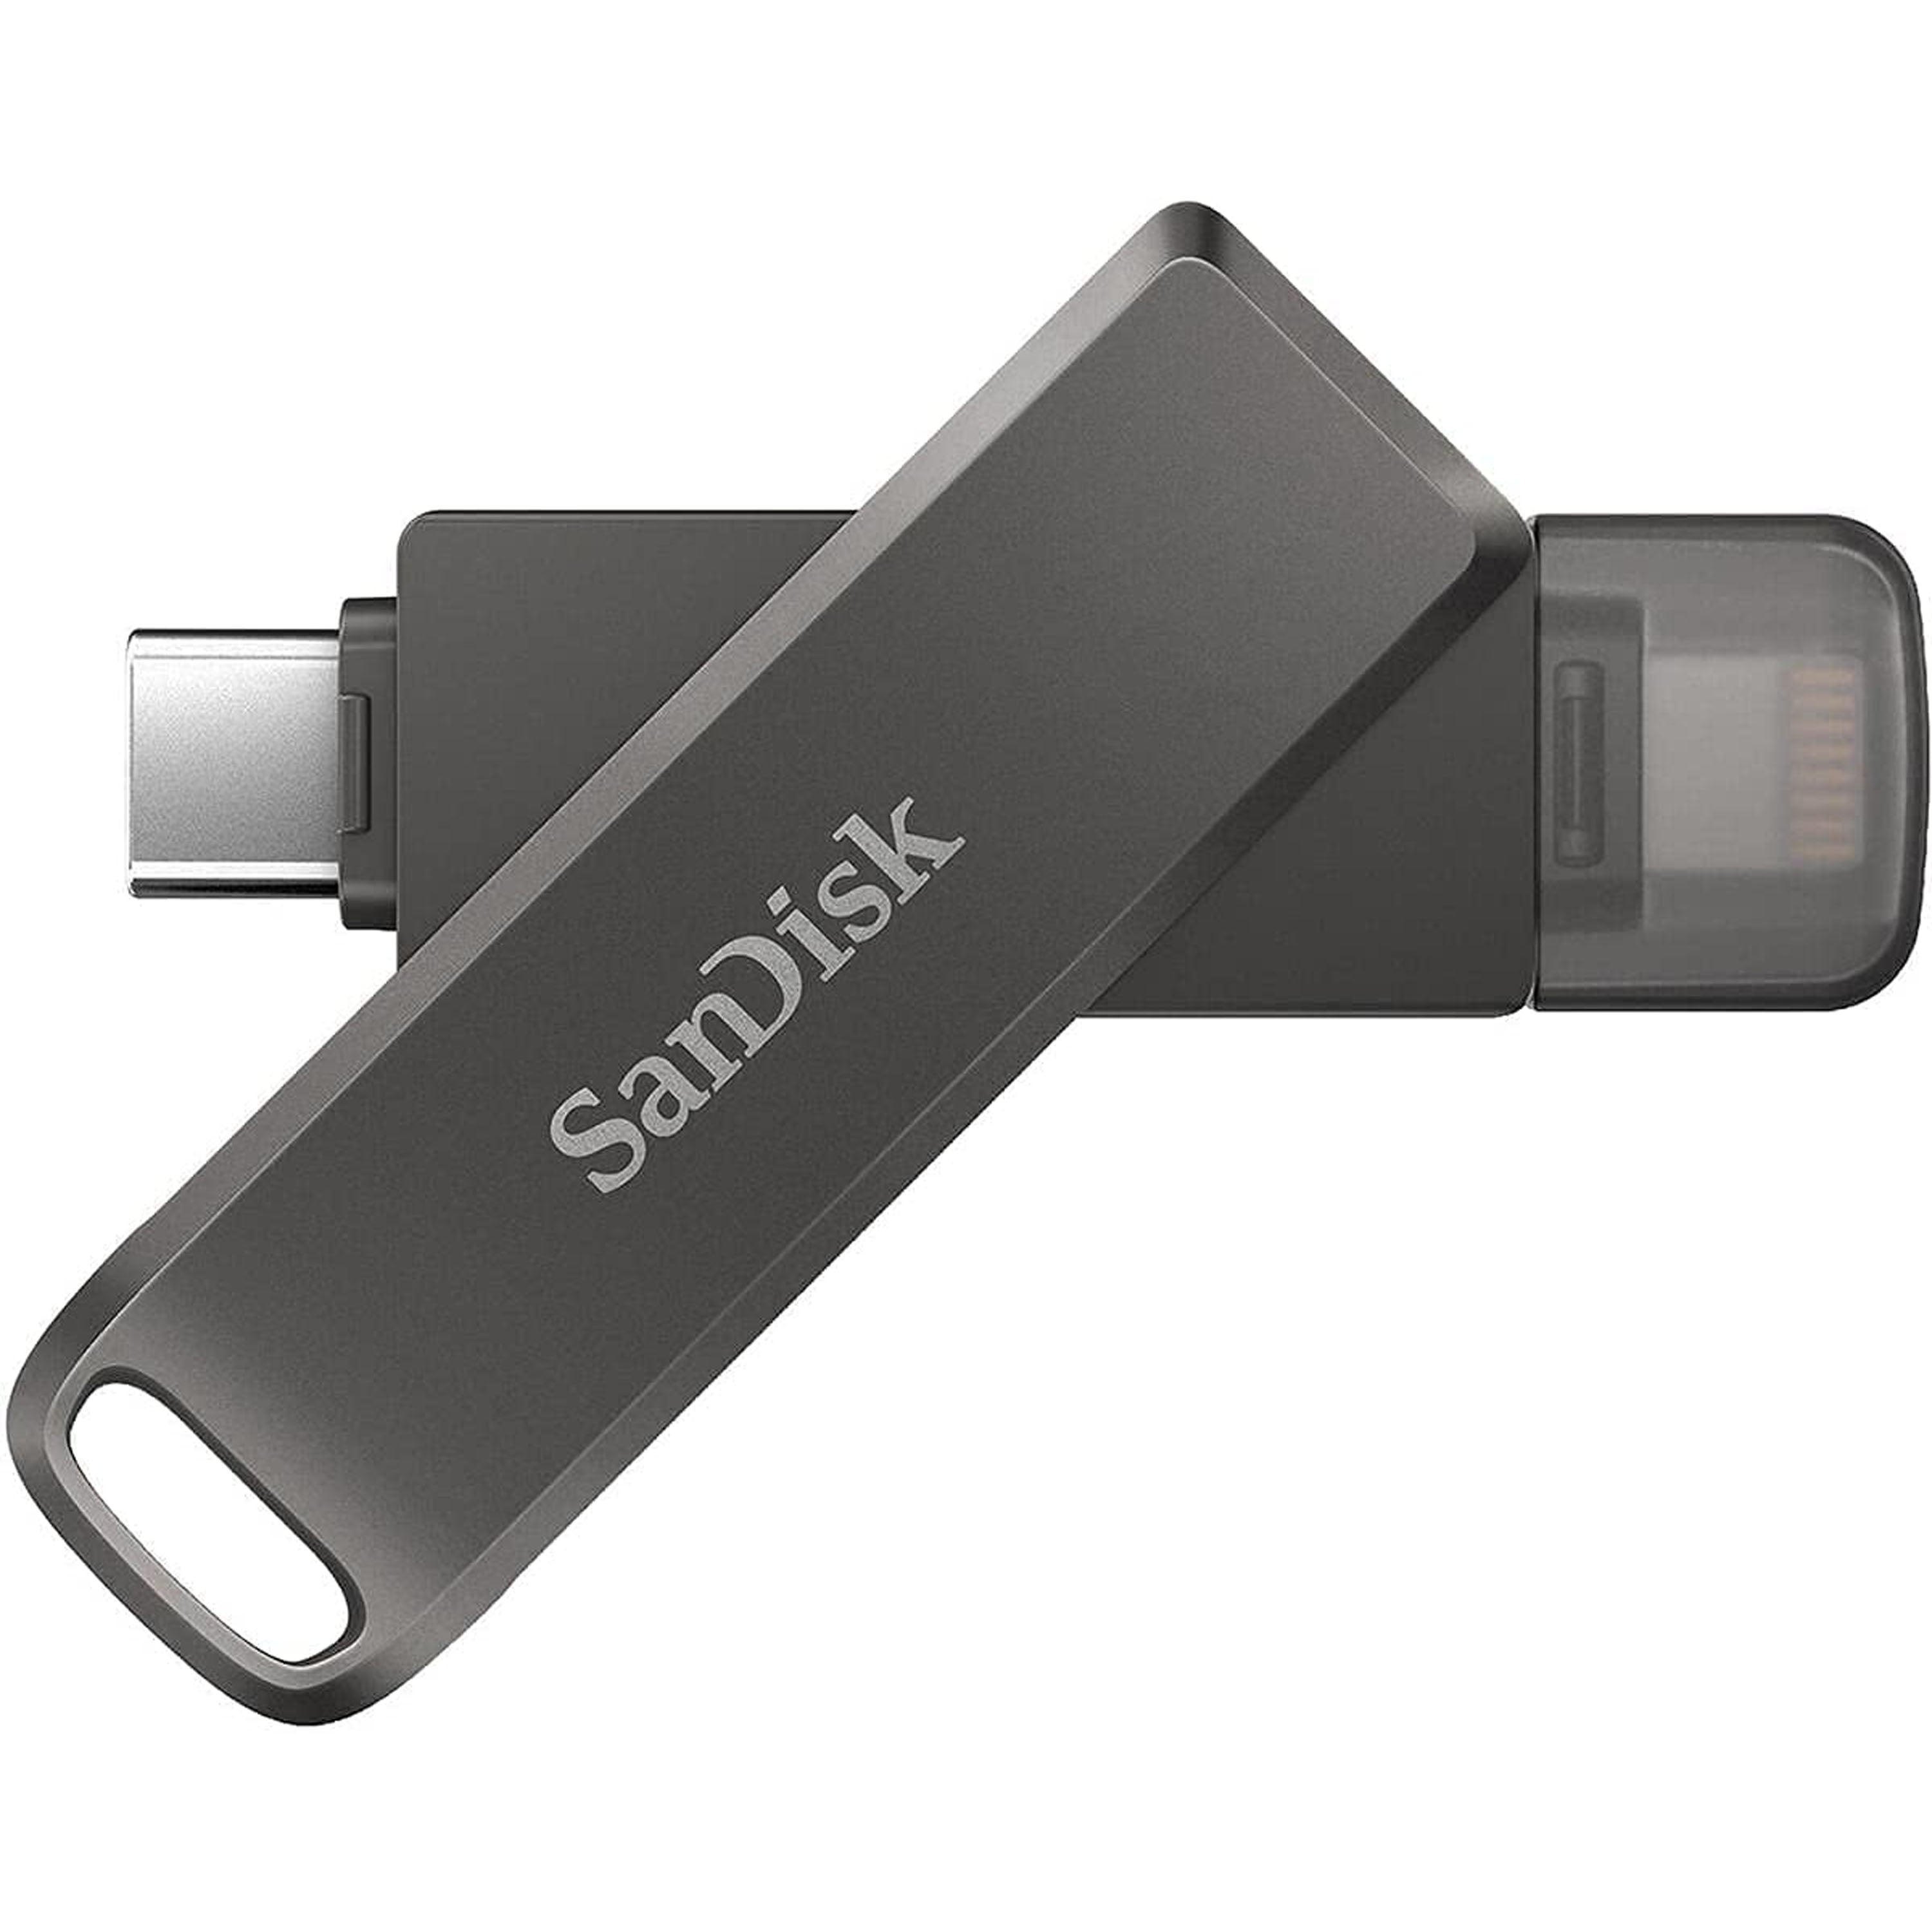 Sandisk iXpand Flash Drive Luxe 128GB